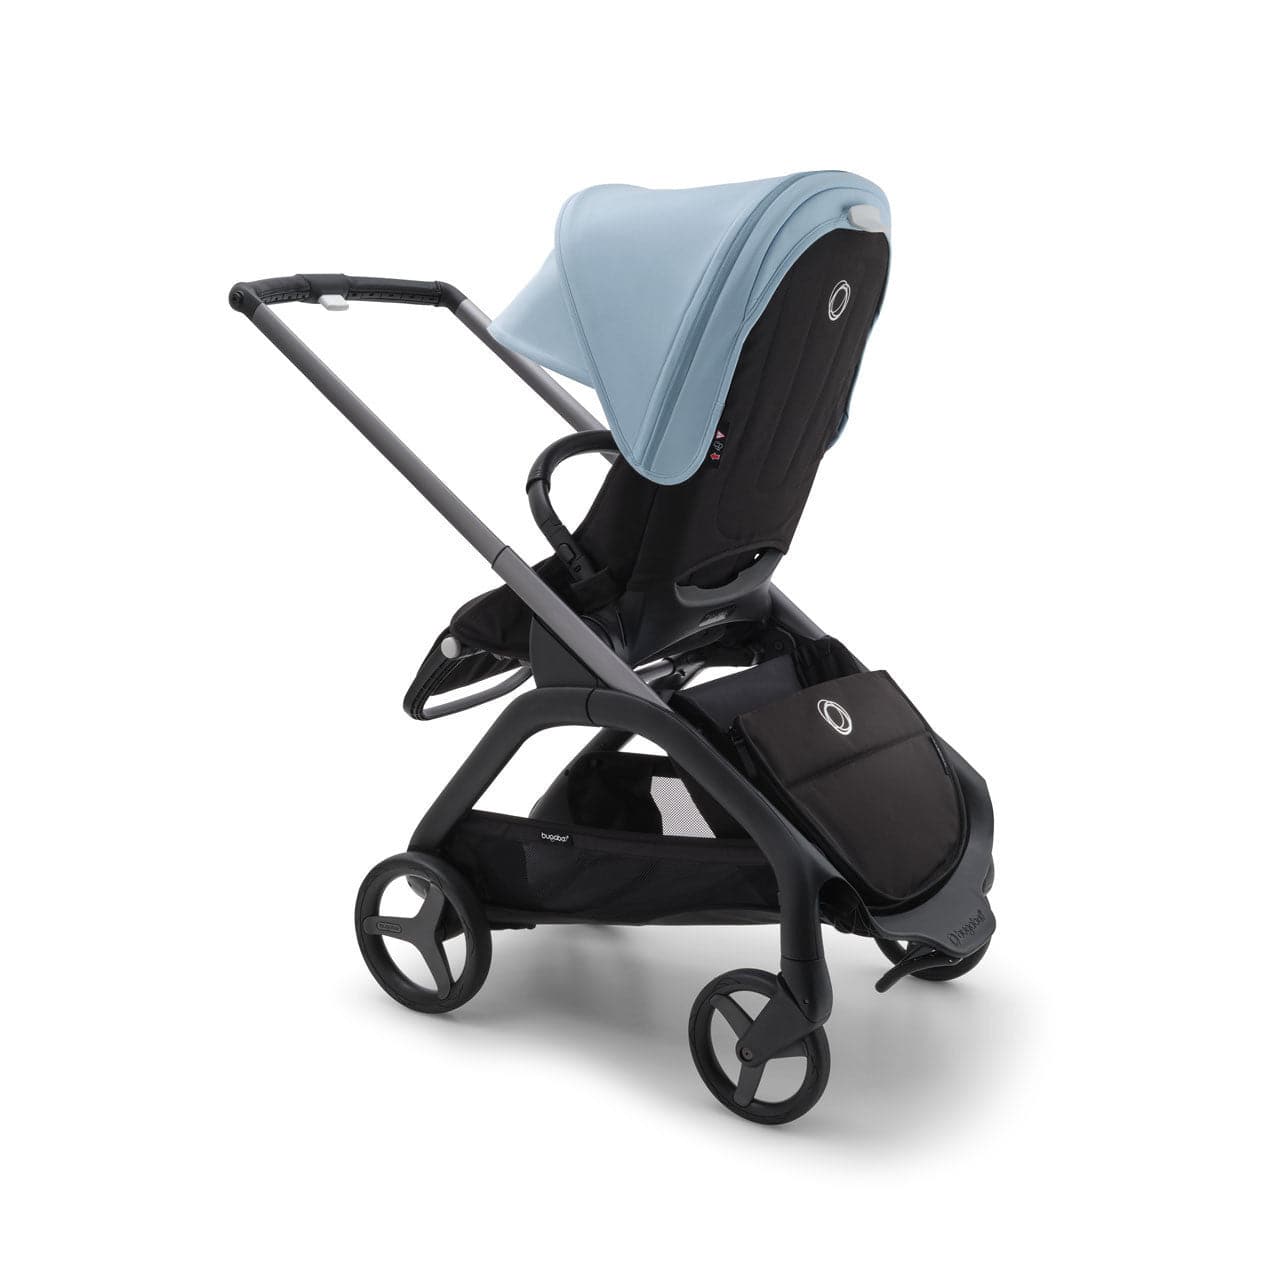 Bugaboo Dragonfly Essential Travel System Bundle - Skyline Blue - For Your Little One